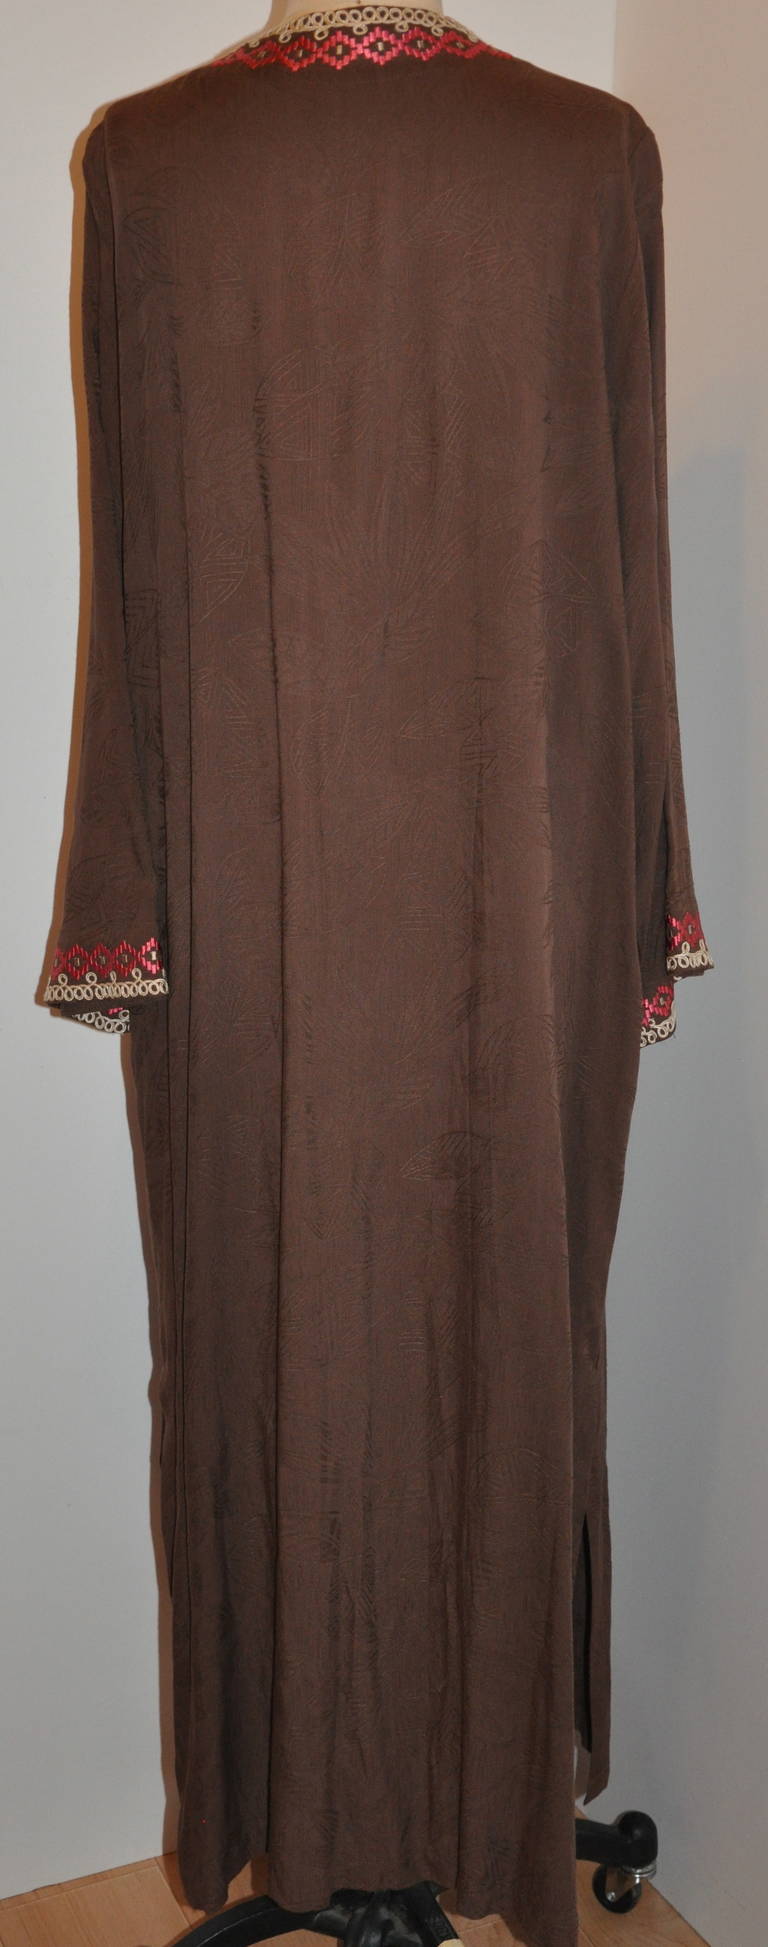 Oscar de la Renta's wonderful coco-brown silk caftan is detailed with silk threads of fuchsia and tan and hand-embroidered along the front, neck and sleeve's cuffs. And finished with swirls of beige.
   The shoulder measures 16